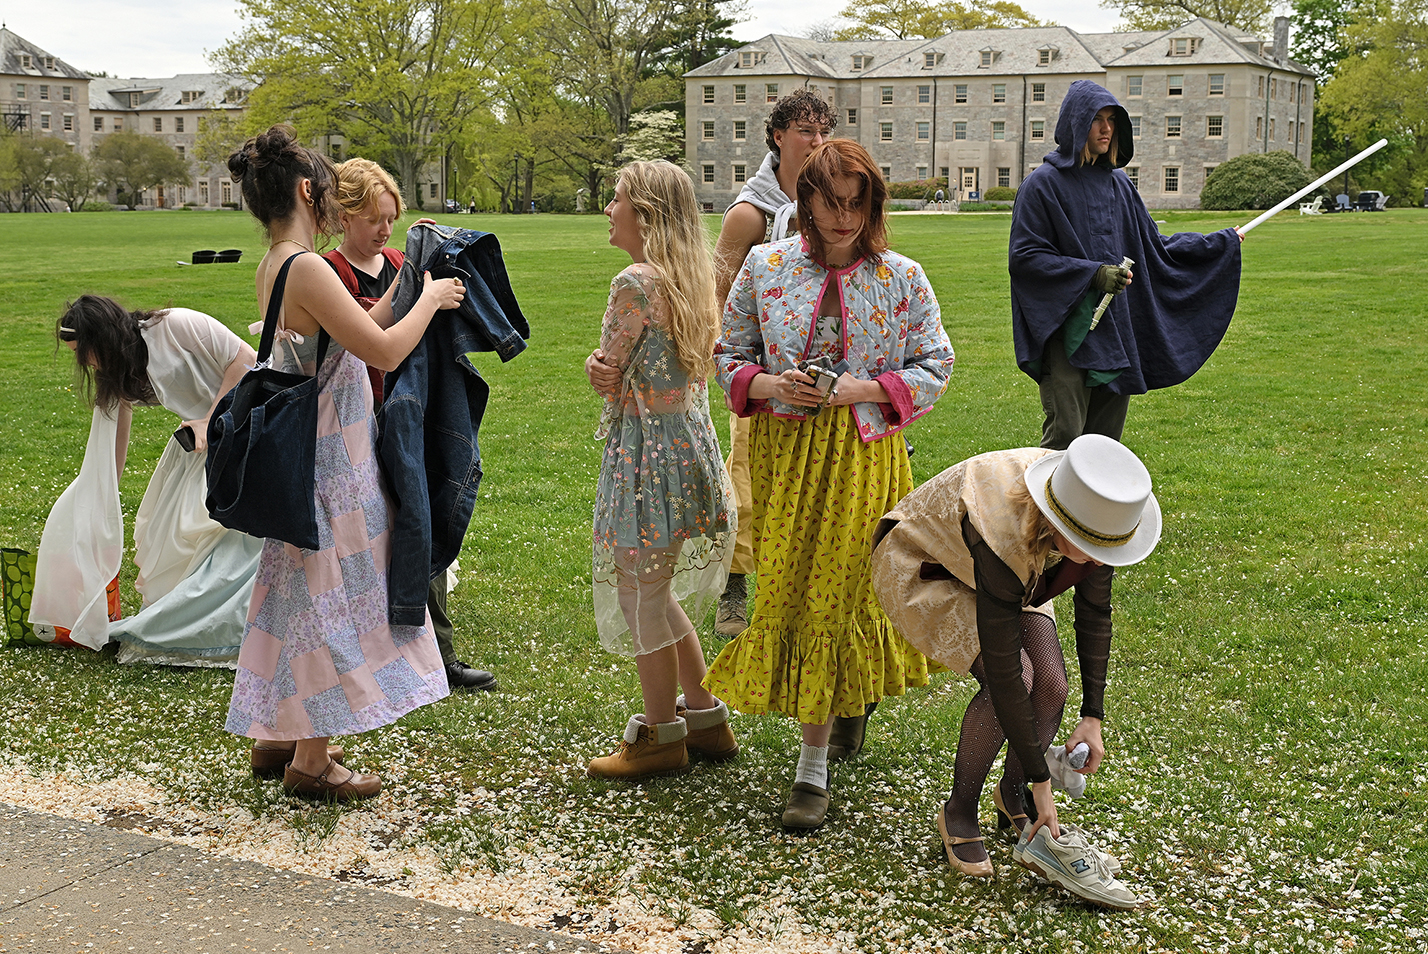 Students in costume gather their things after a photo session